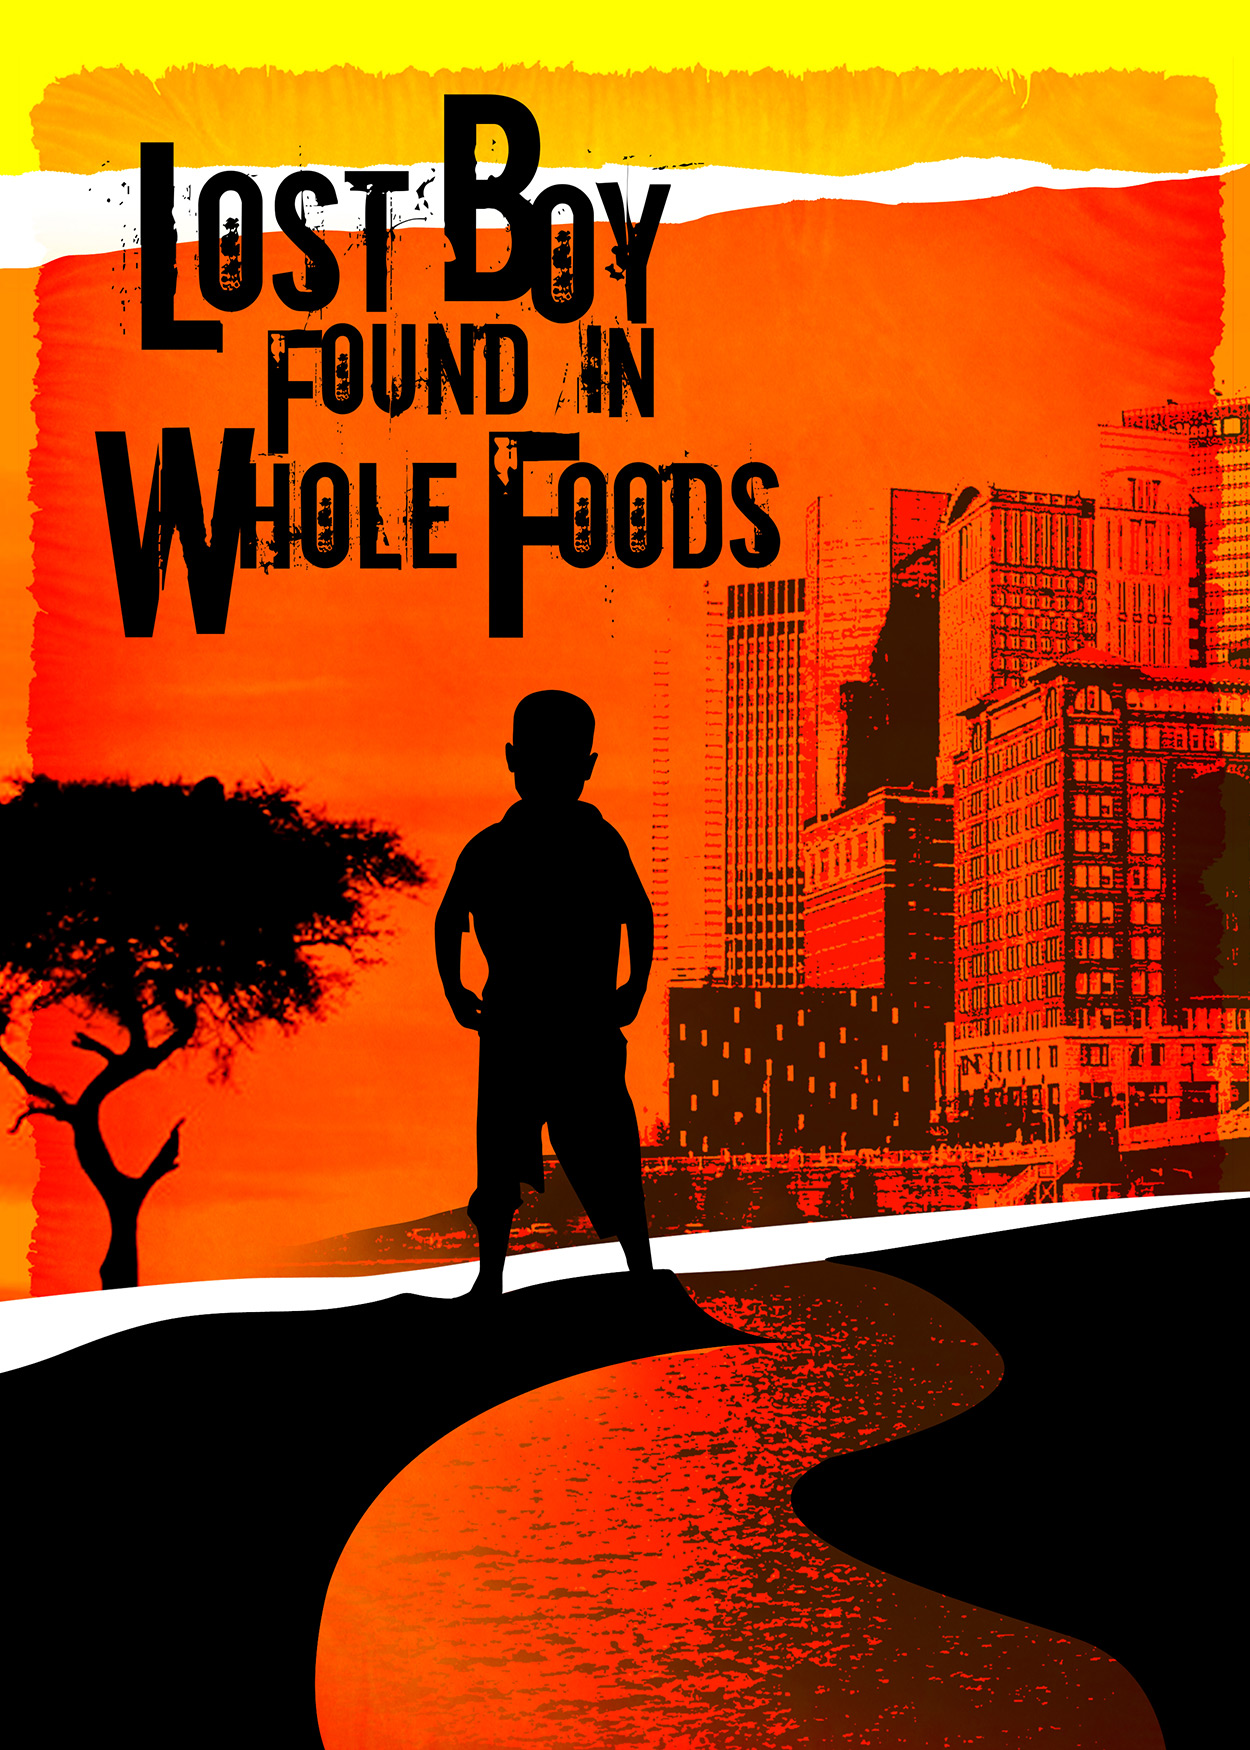 Artwork- silhouette of a man in front of city landscape in red, yellow and orange colors. title of play "Lost Boy in Whole Foods"